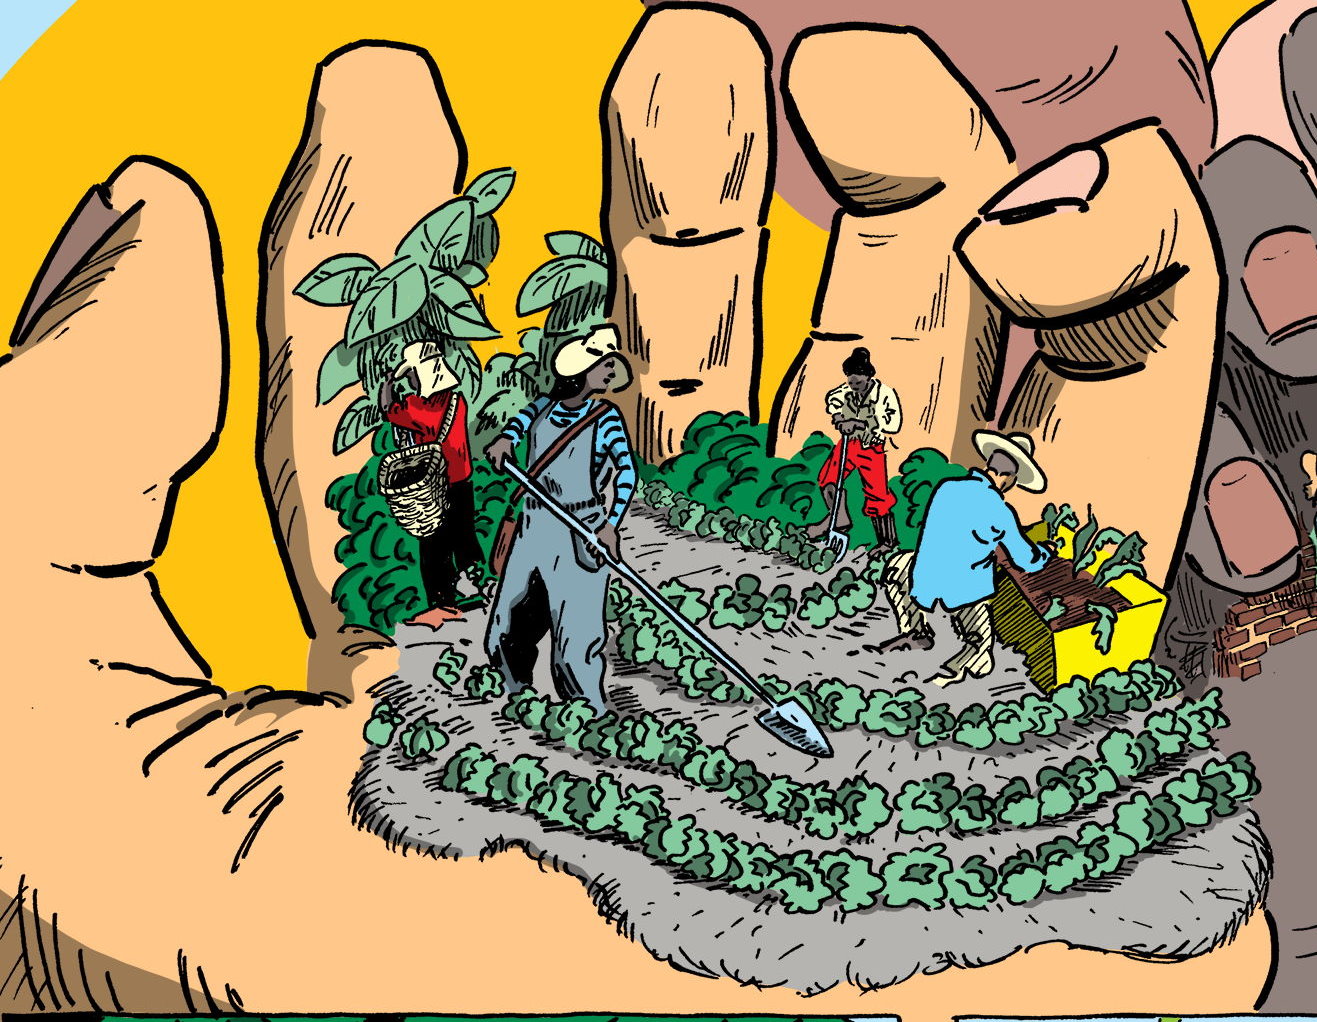 comic book image of a giant hand holding a small patch of land with people growing food